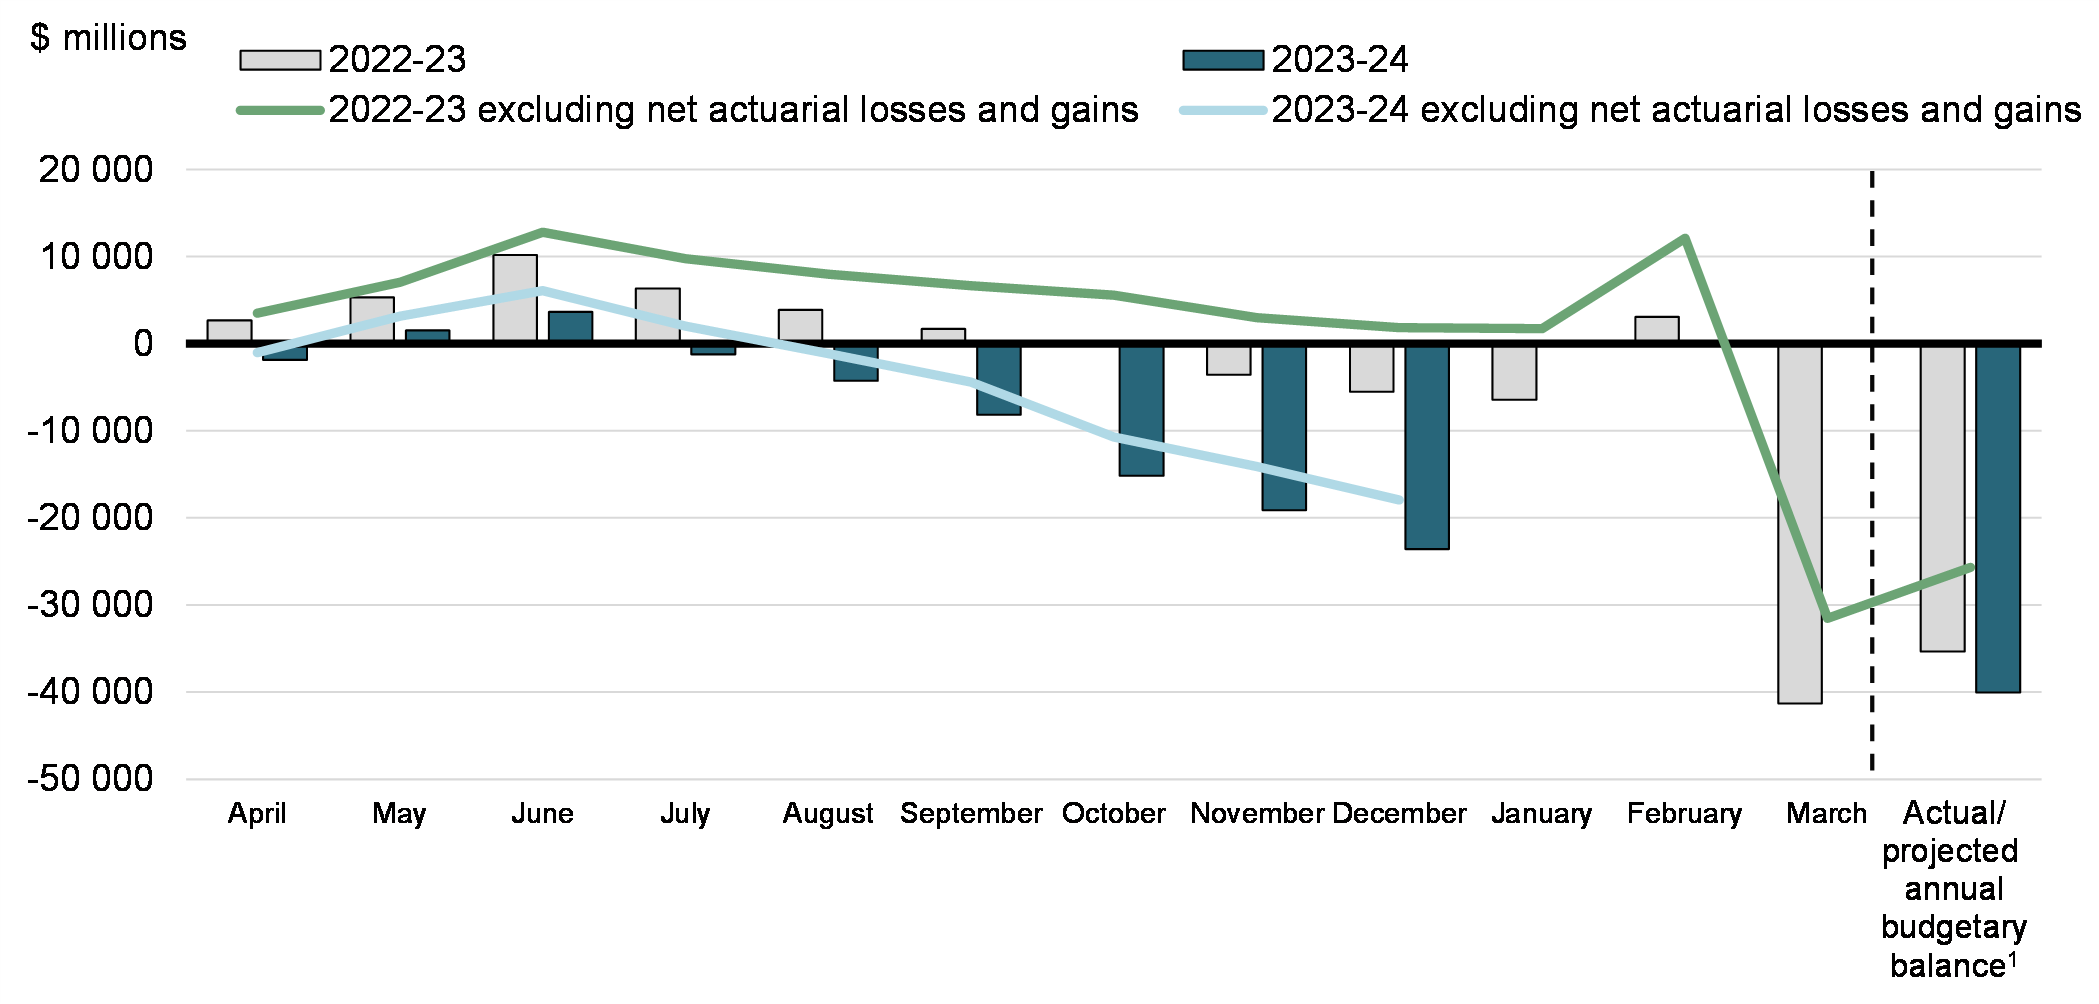 Chart 2: Year-to-Date Budgetary Balance and Budgetary Balance Excluding Net Actuarial Losses and Gains